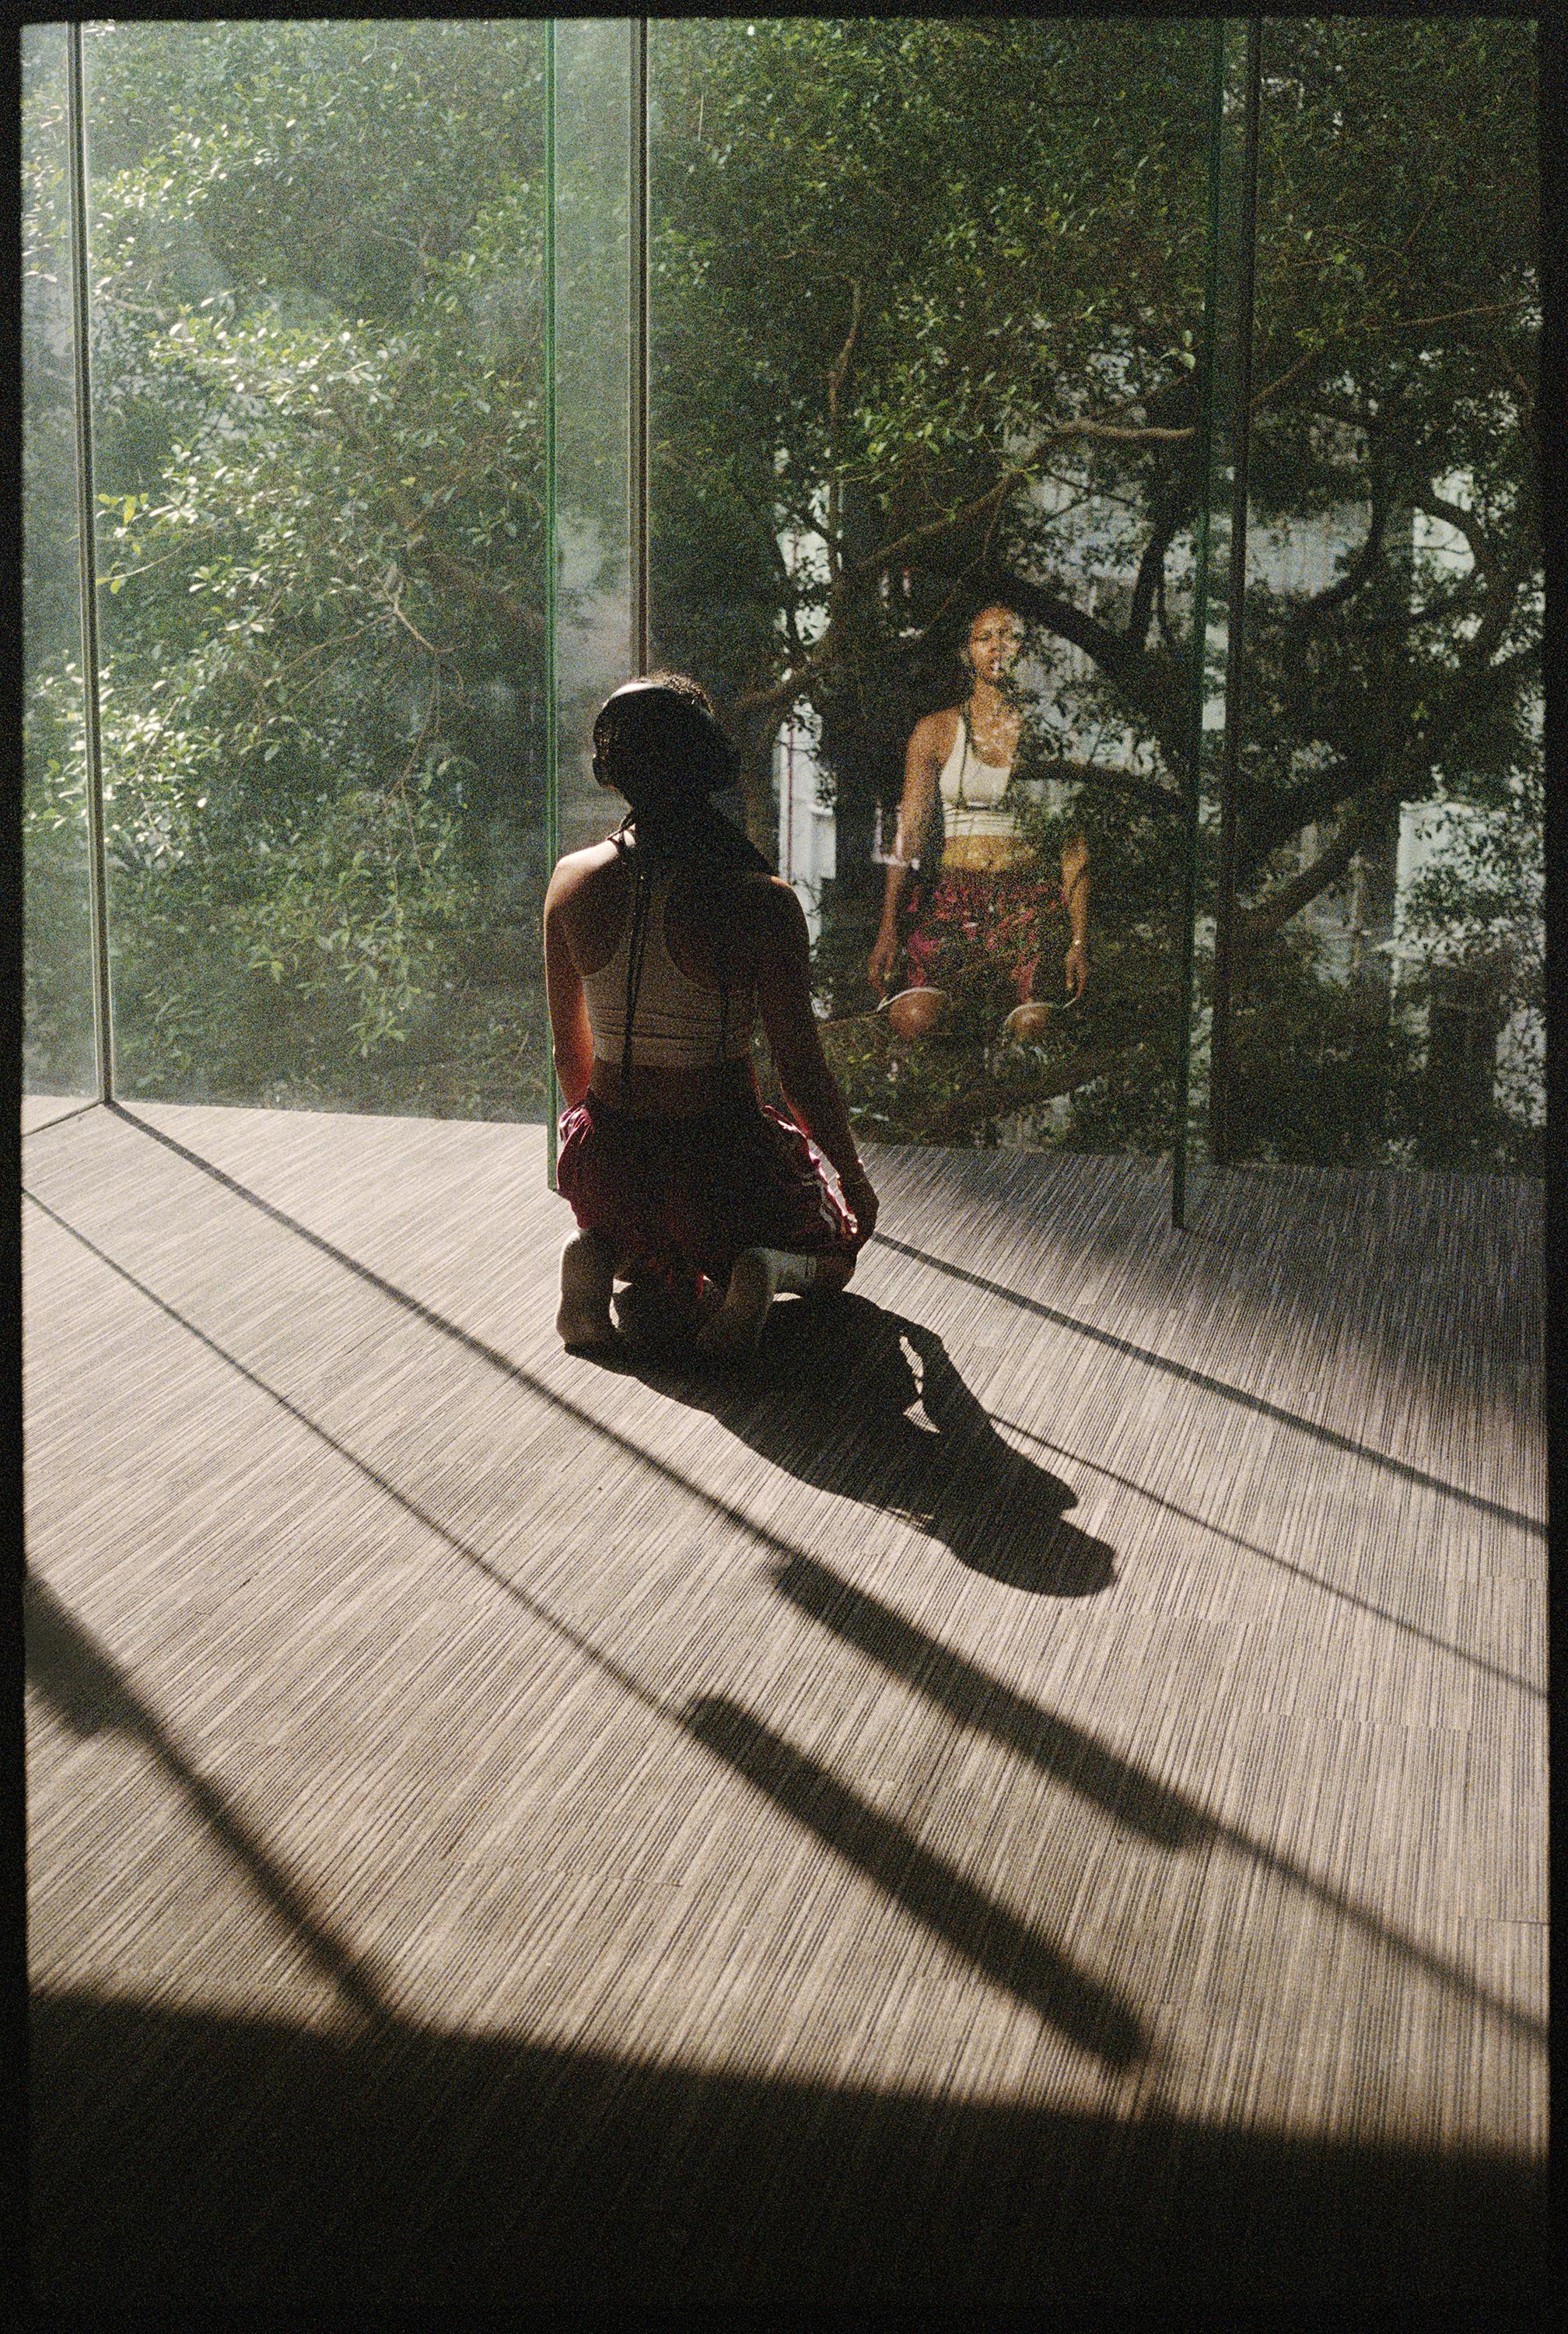 Dancer seated on her knees in the studio, facing the greenery outside the bay windows.